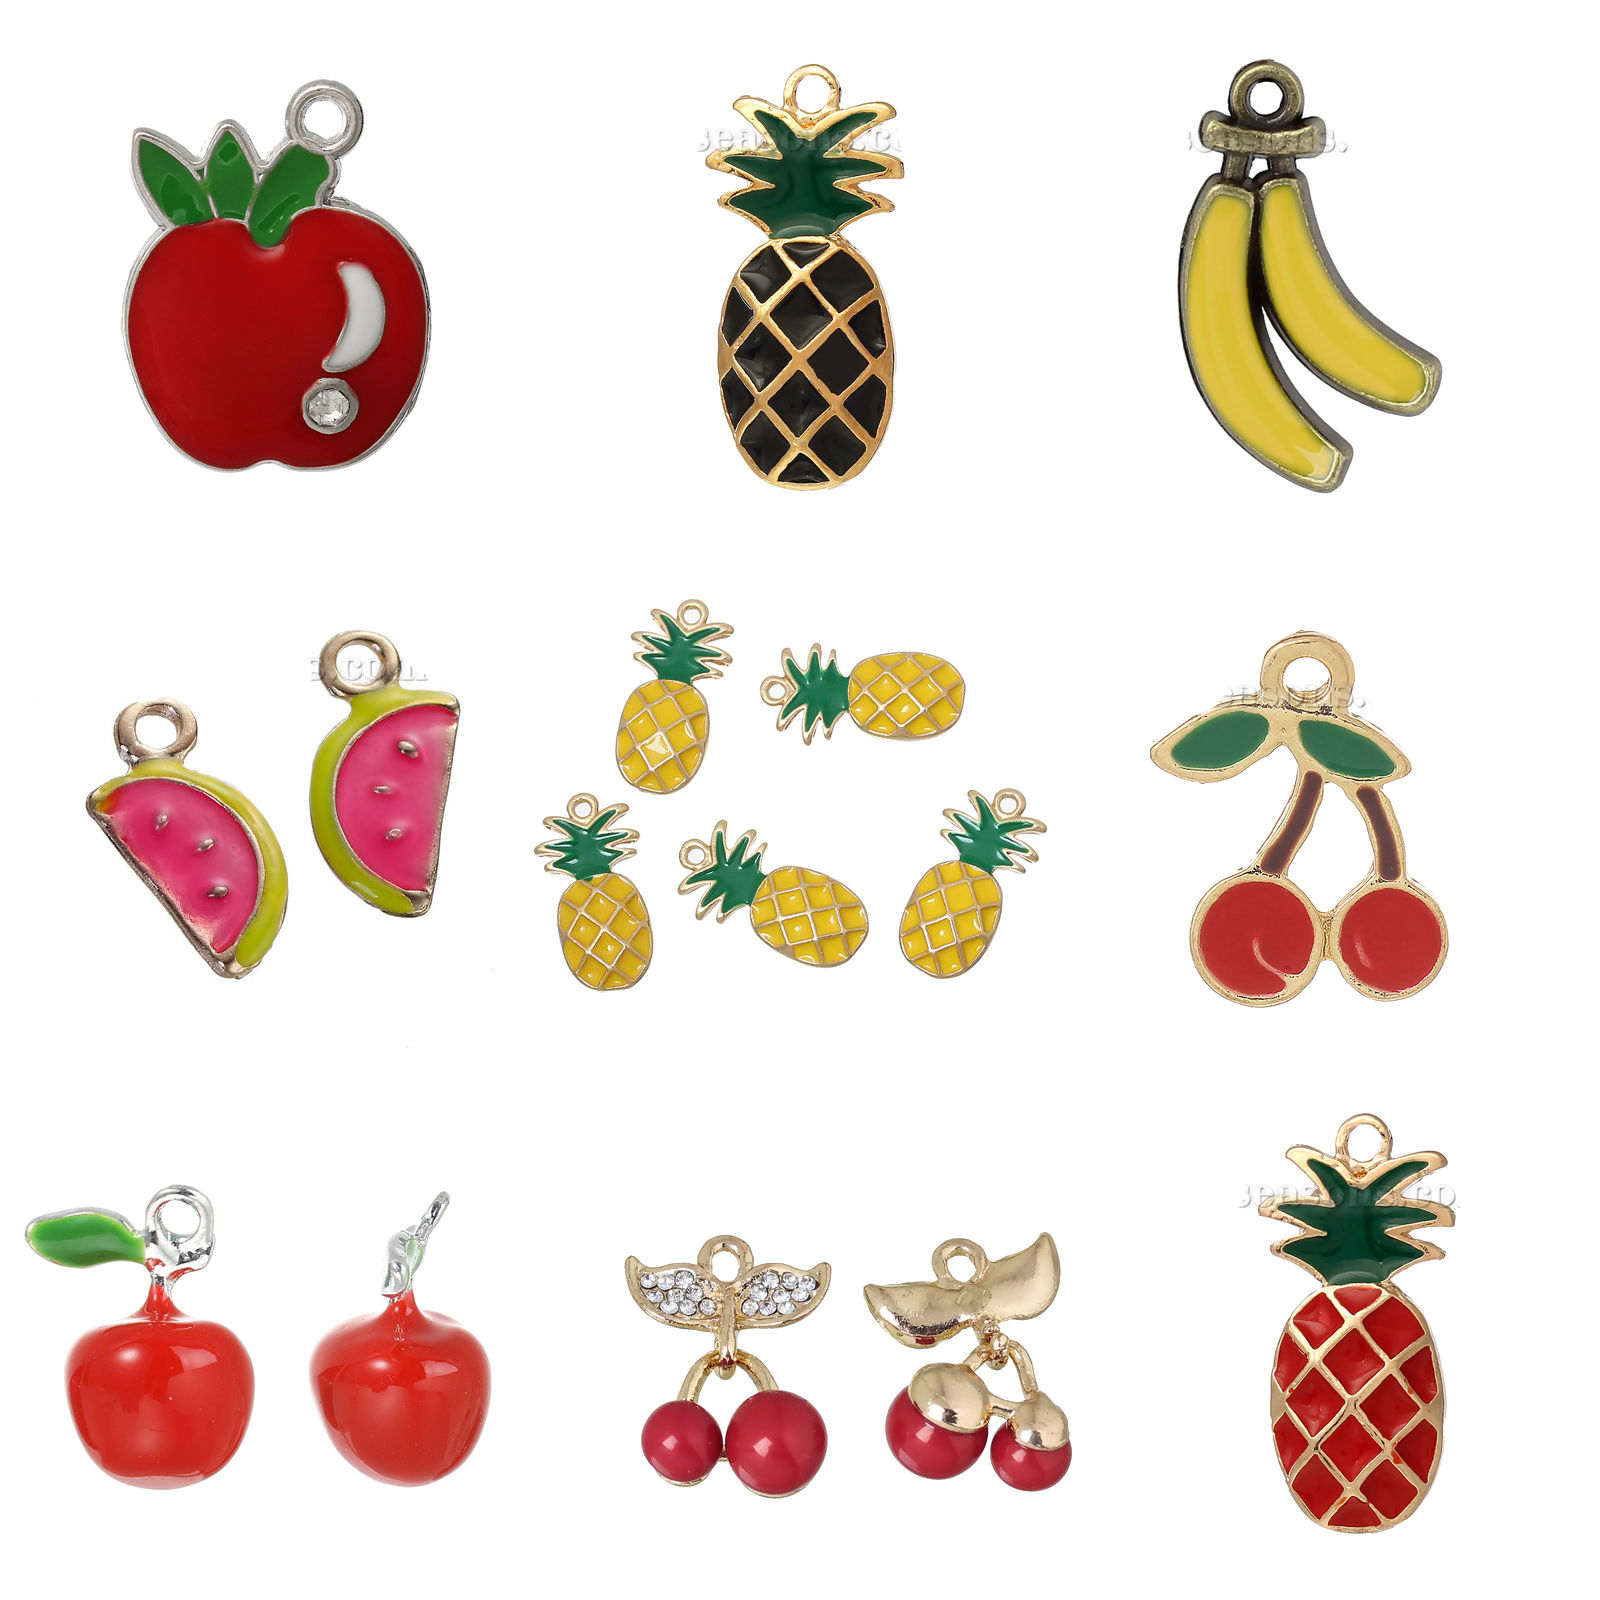 Picture of Zinc Based Alloy 3D Charms Cherry Fruit Antique Silver Red & Green Enamel 18mm x14mm( 6/8" x 4/8"), 20 PCs